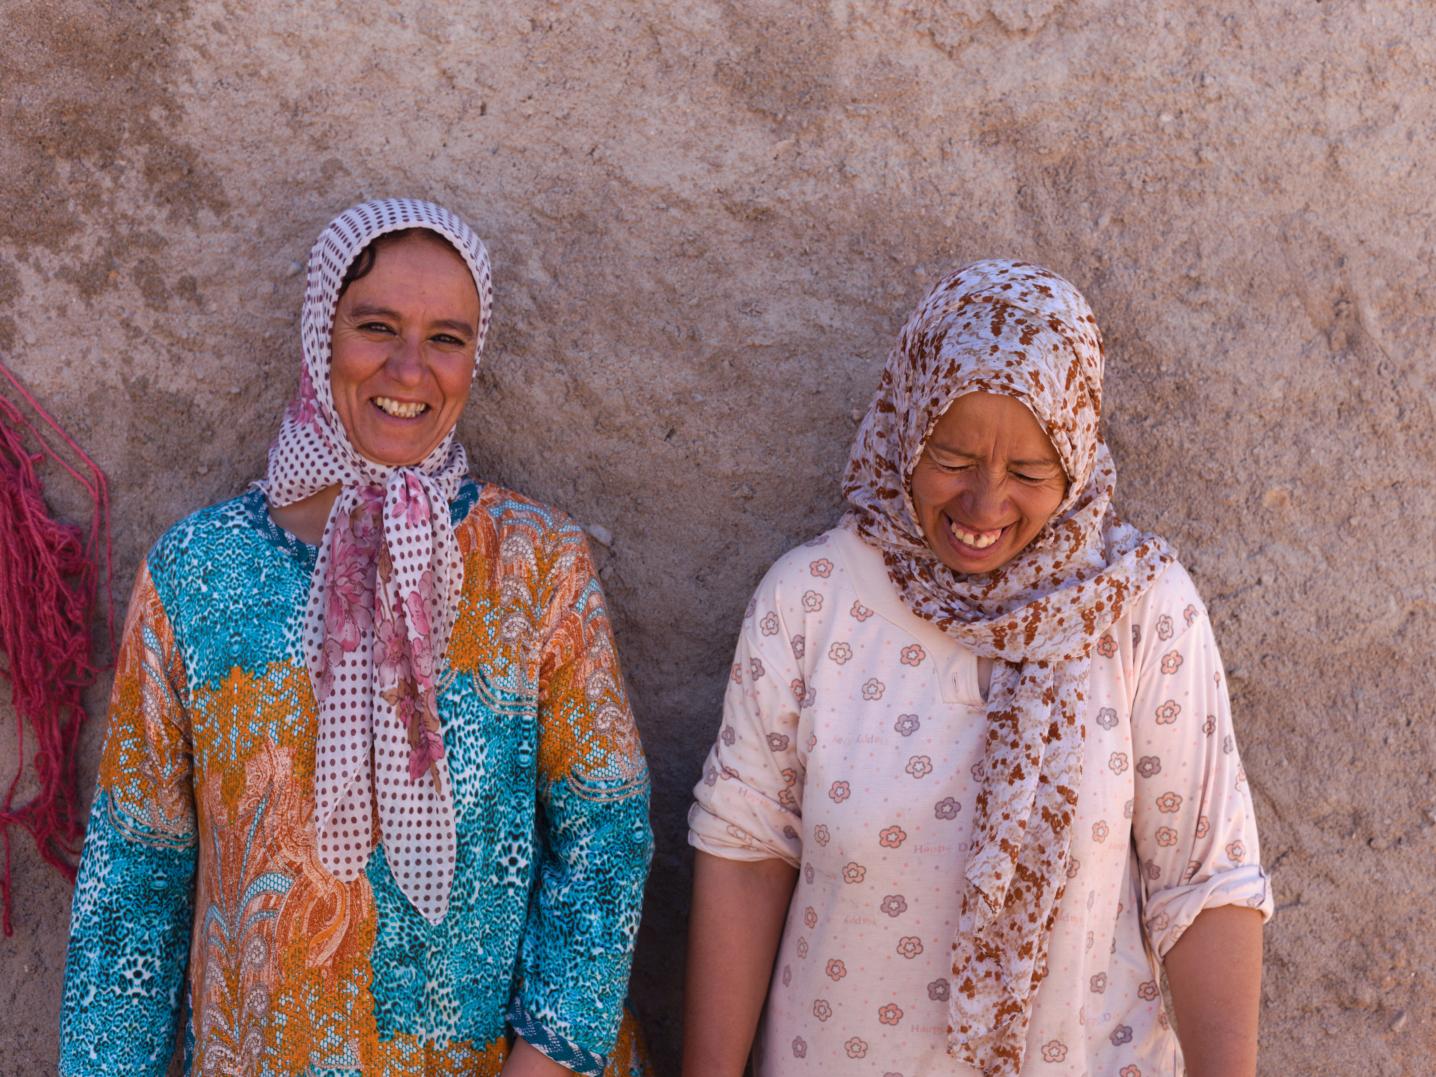 Rahma Ifakkiren and Naima Ouagga of Cooperative: Tefaout n’takdift in the city of Taznakht, Morocco, participants of the project 'One Square Meter Berber' by Mina Abouzahra, 2020.